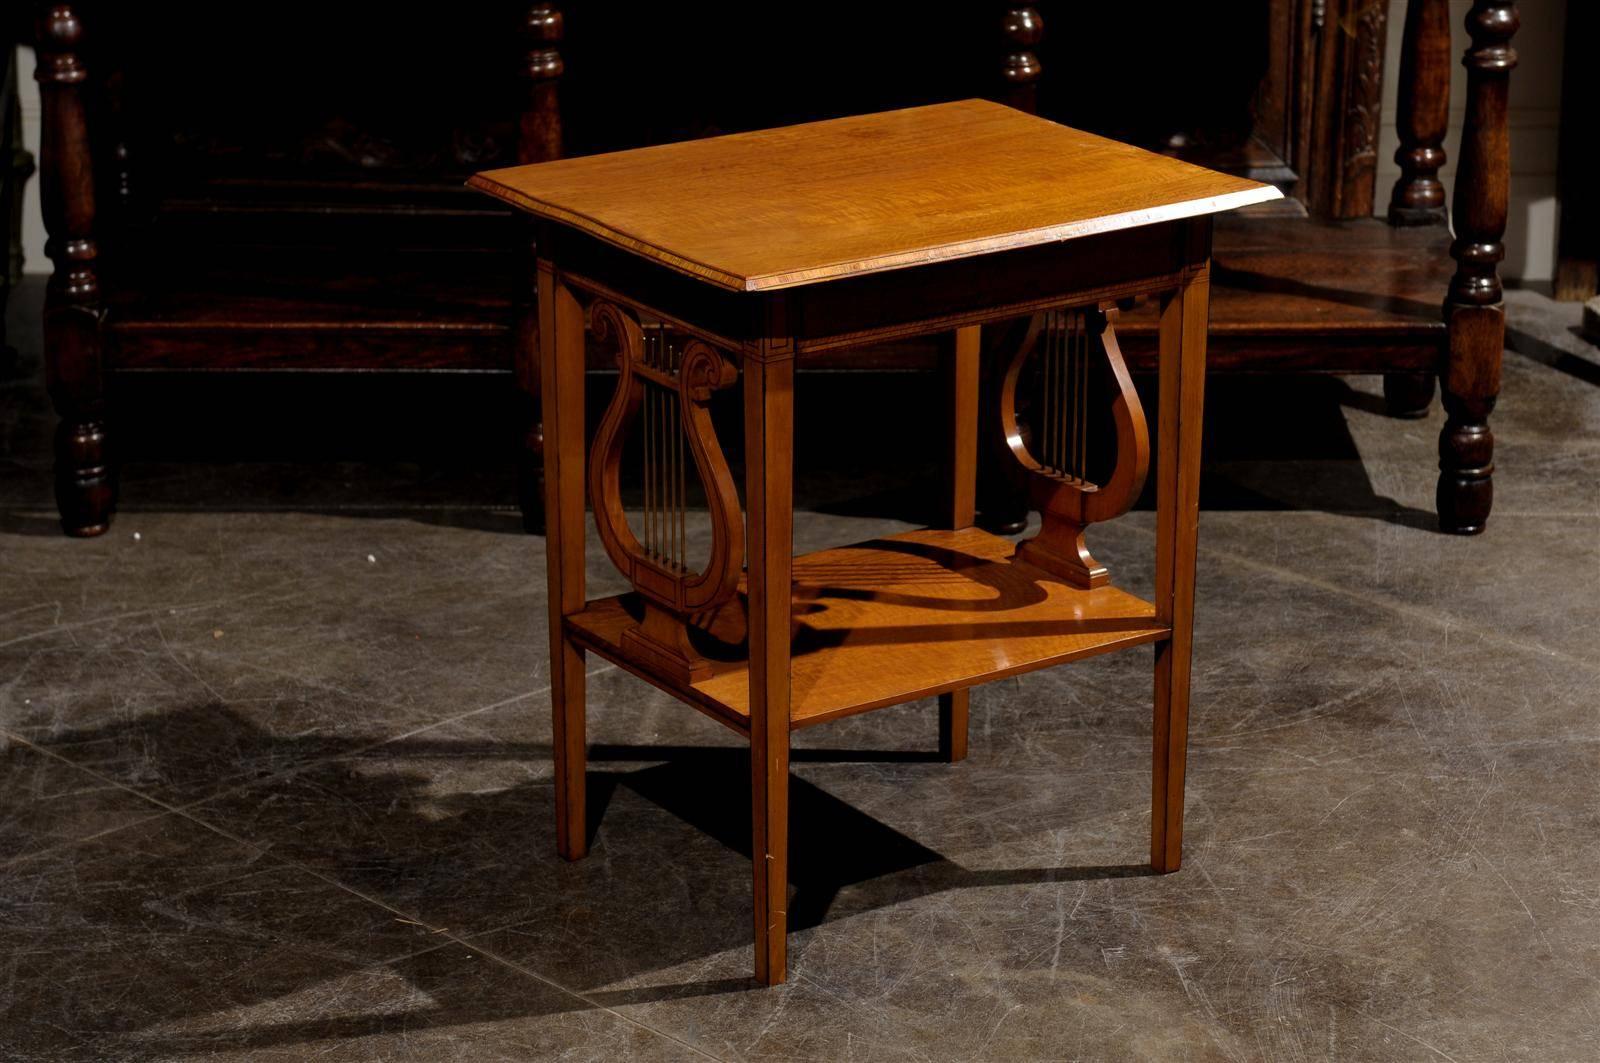 A petite late 19th century English satinwood accent table from English firm Collinson and Lock. This petite English side table from circa 1890 is made of satinwood and features a rectangular top over four slightly tapered and straight legs, as well